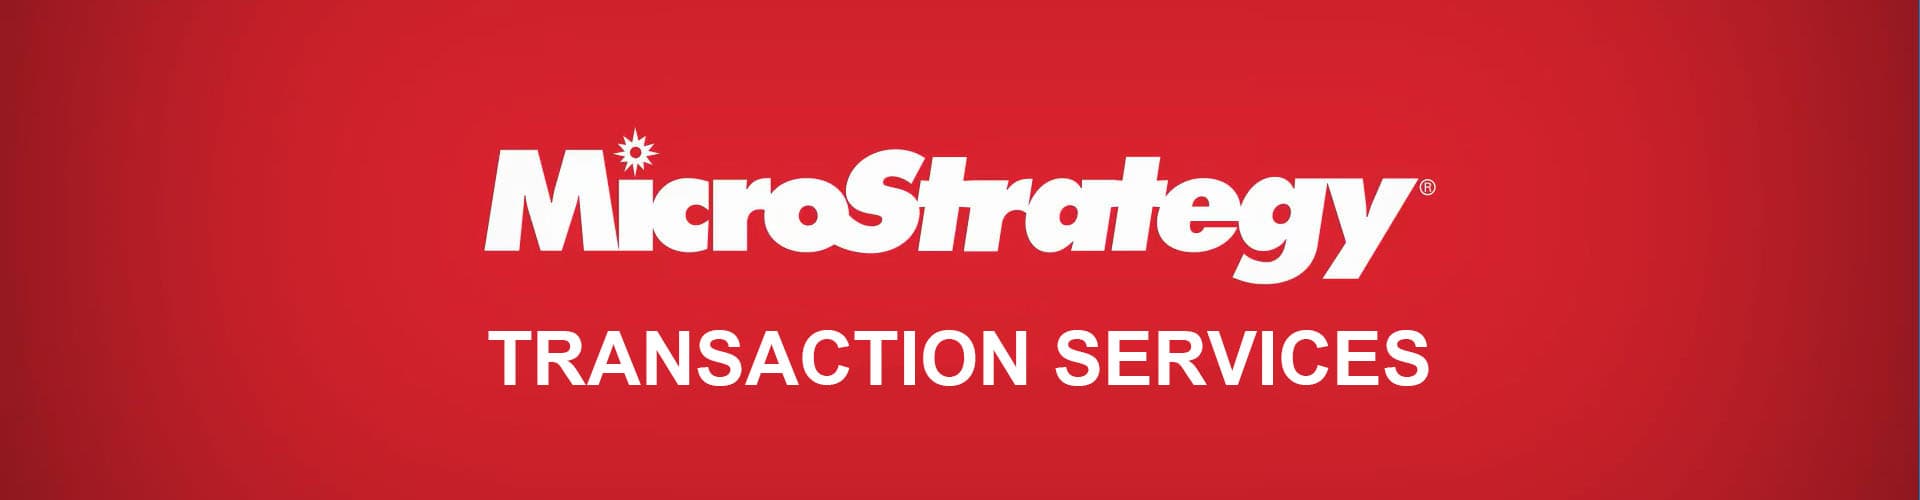 MicroStrategy Transaction Services